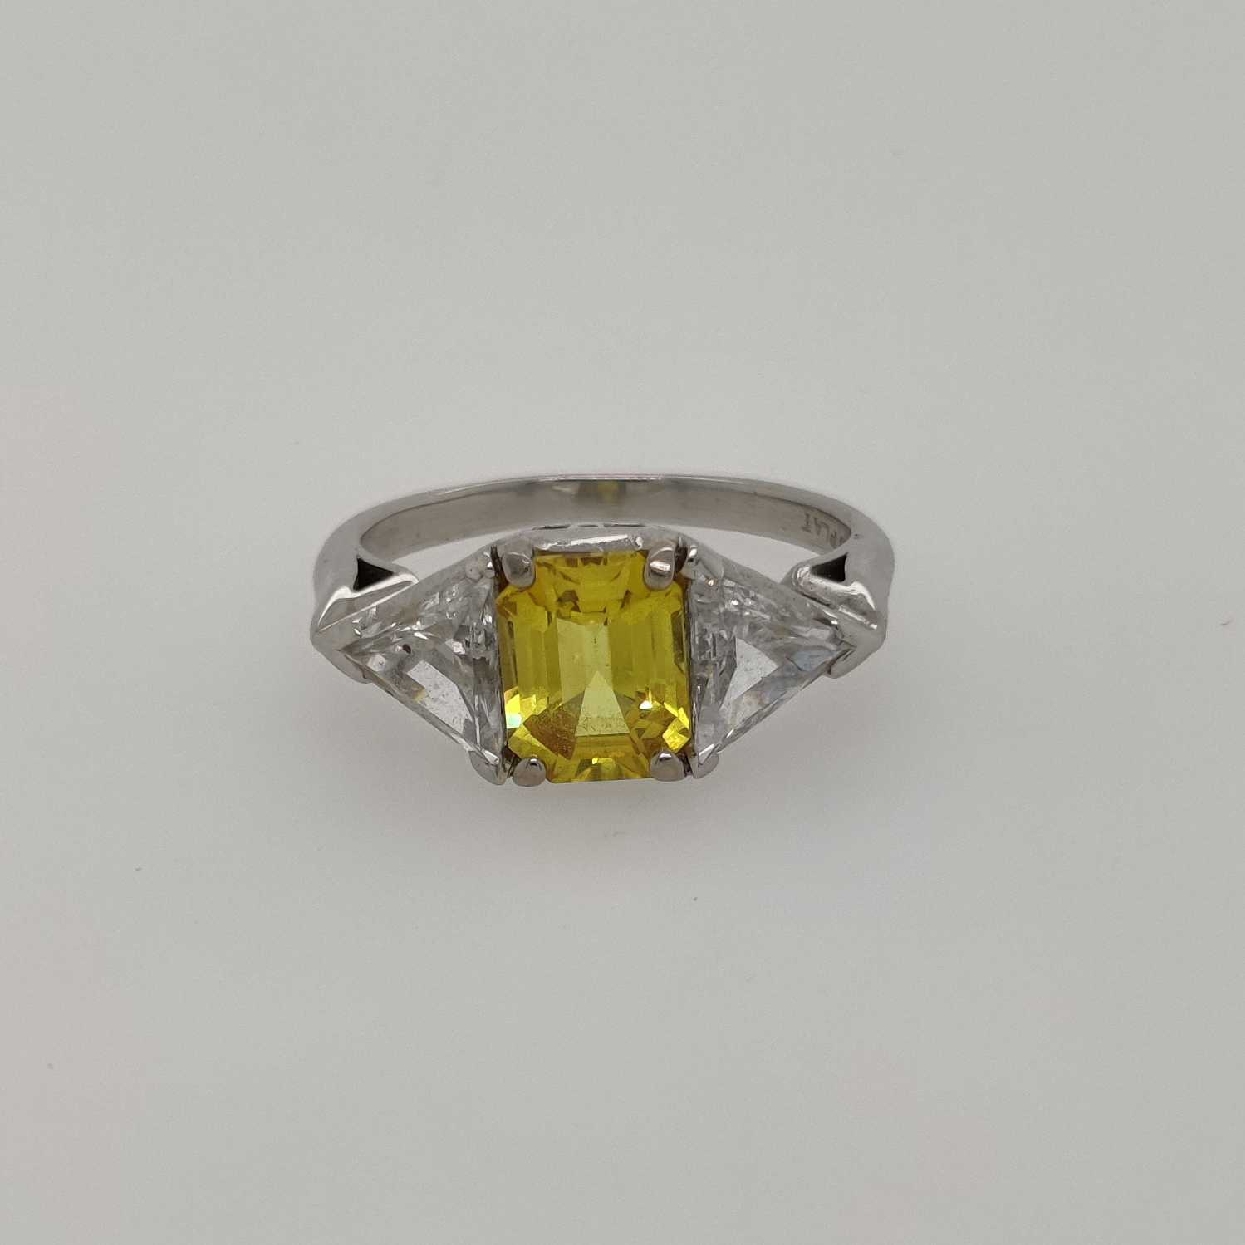 Platinum Ring with Emerald Cut Yellow Sapphire and Two Trillion Cut Diamonds Size 4.75